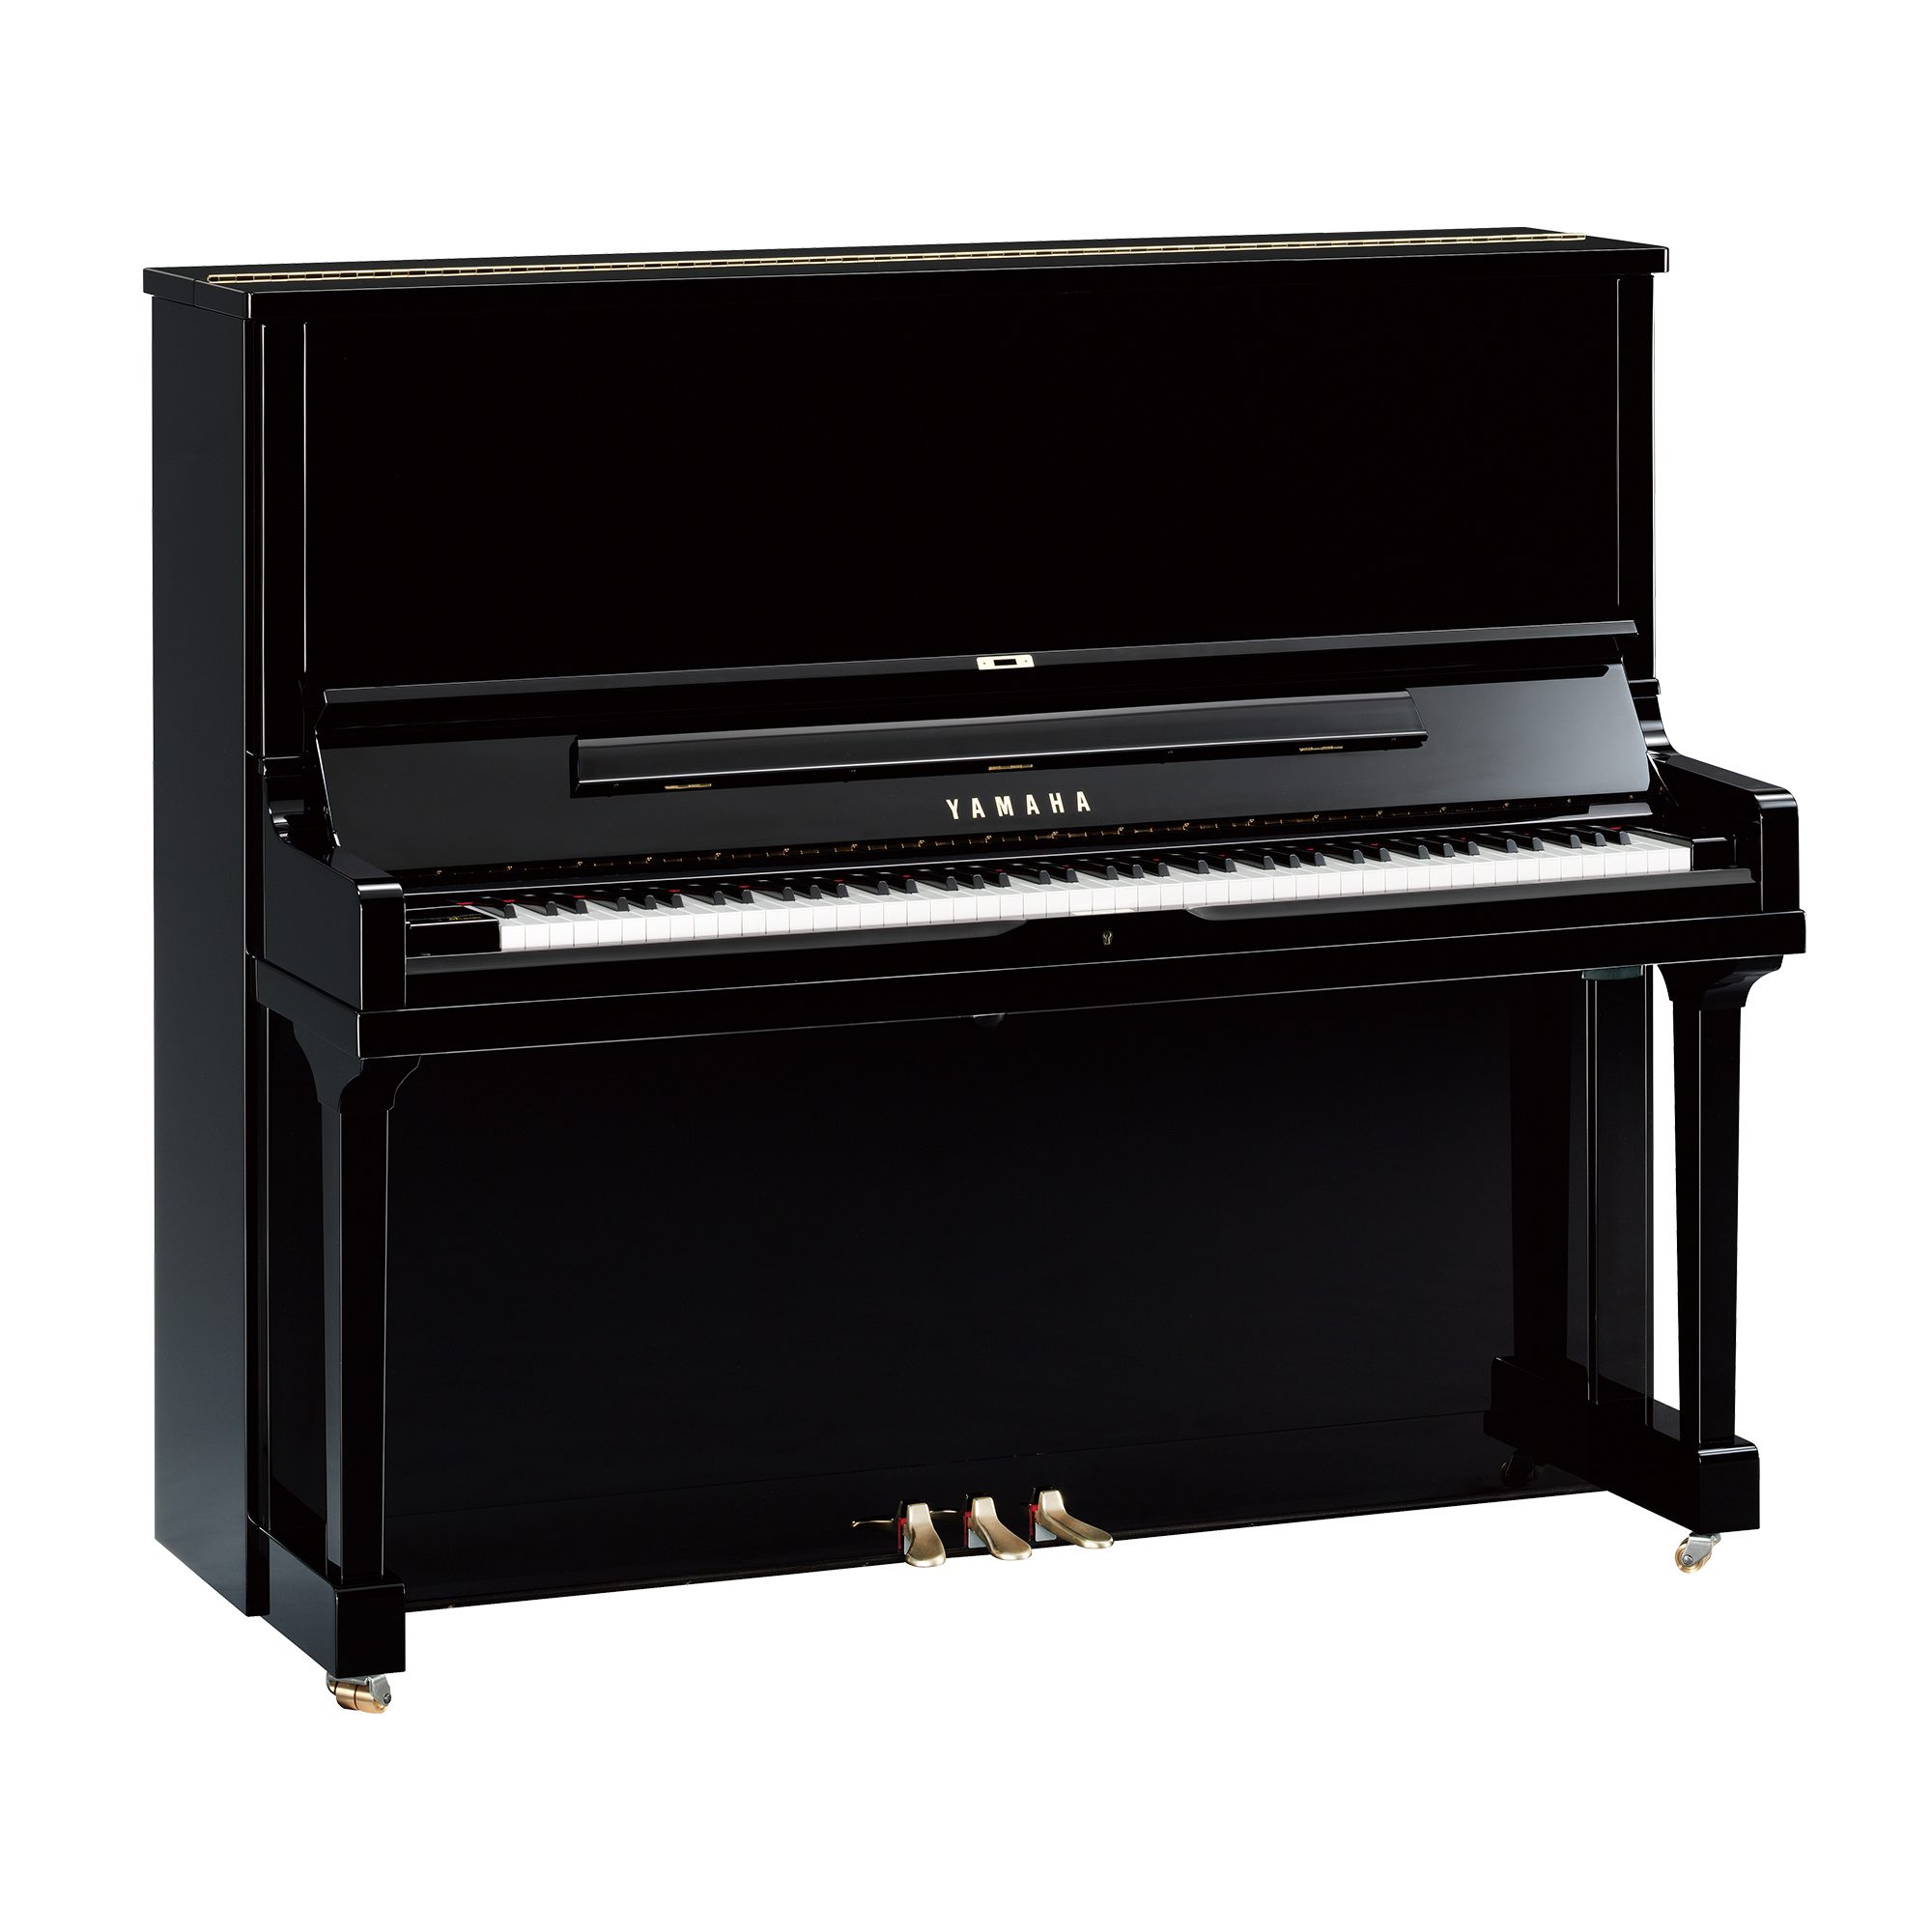 SE Series - Overview - UPRIGHT PIANOS - Pianos - Musical ...